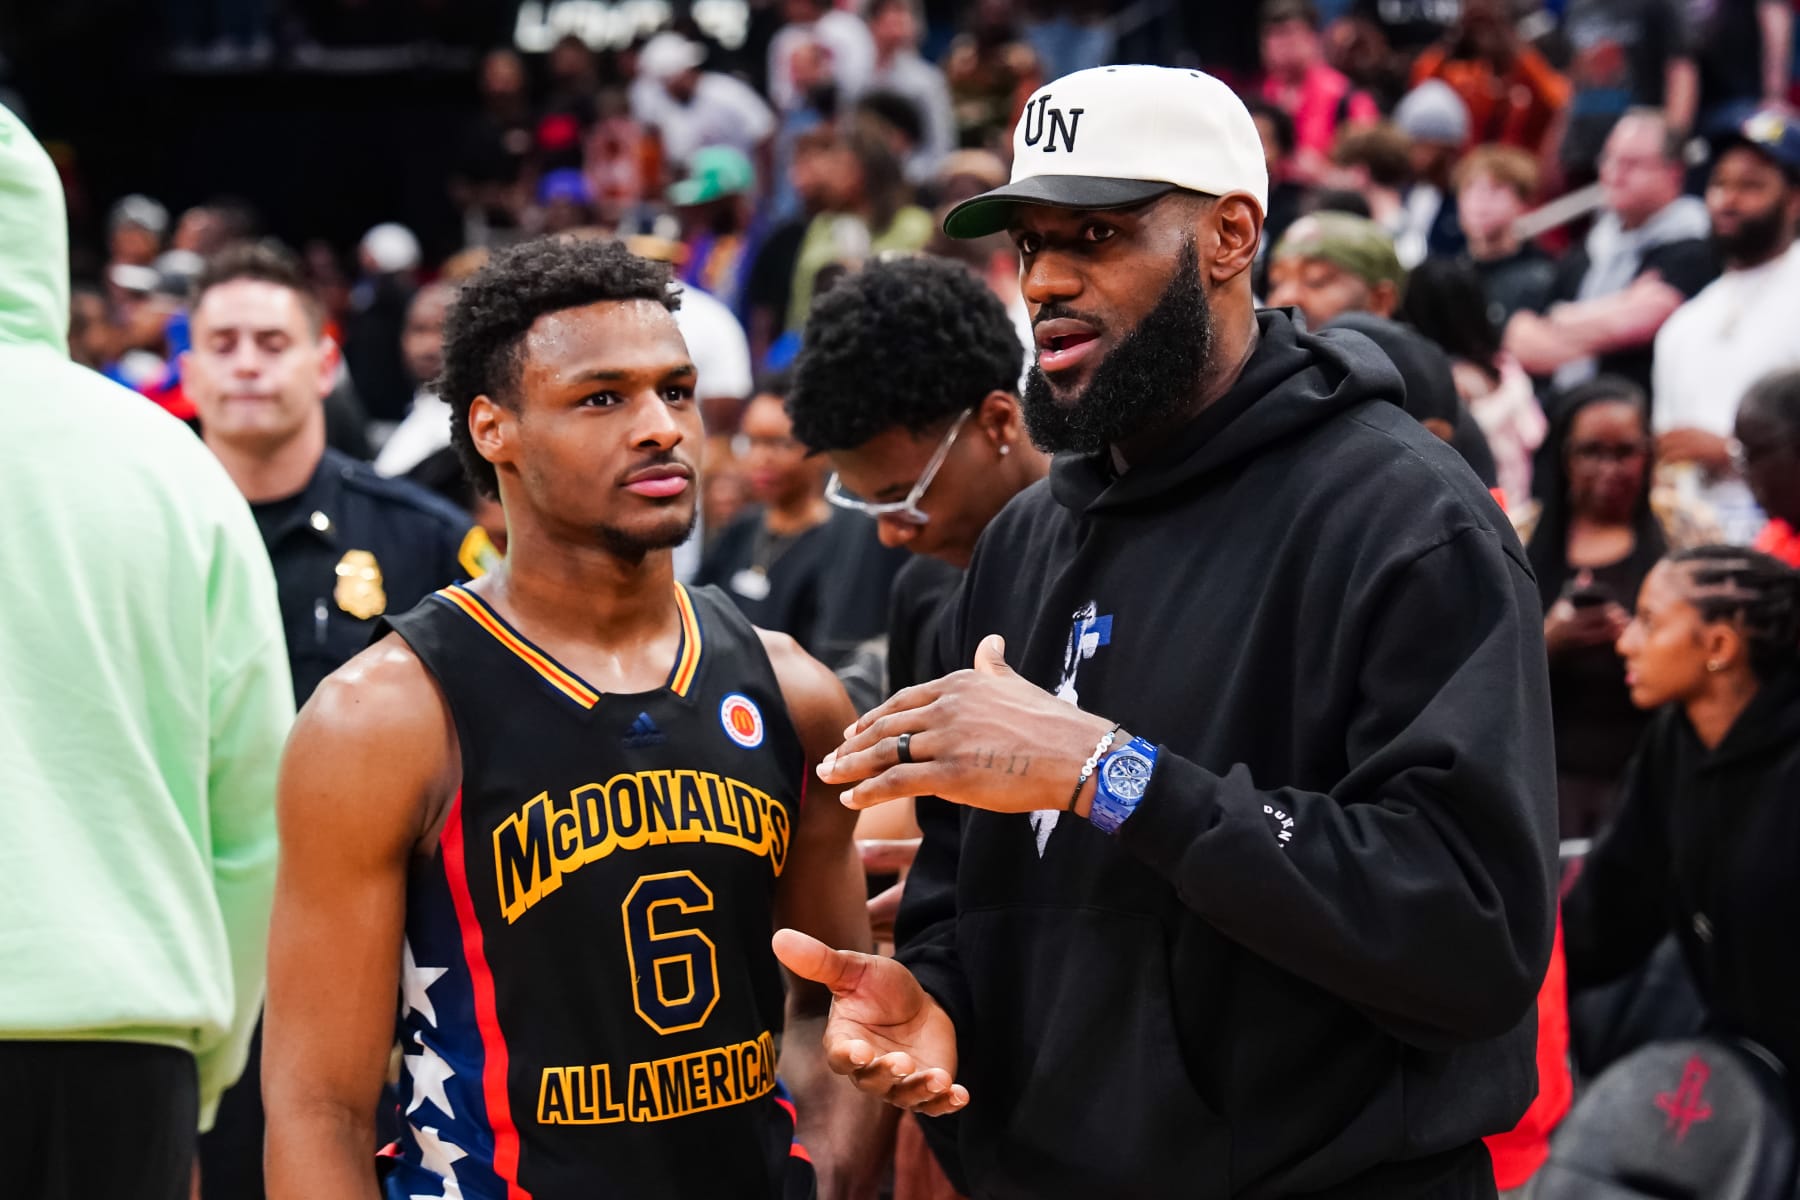 Insiders believe Los Angeles will find a way to draft LeBron James’ son Bronny